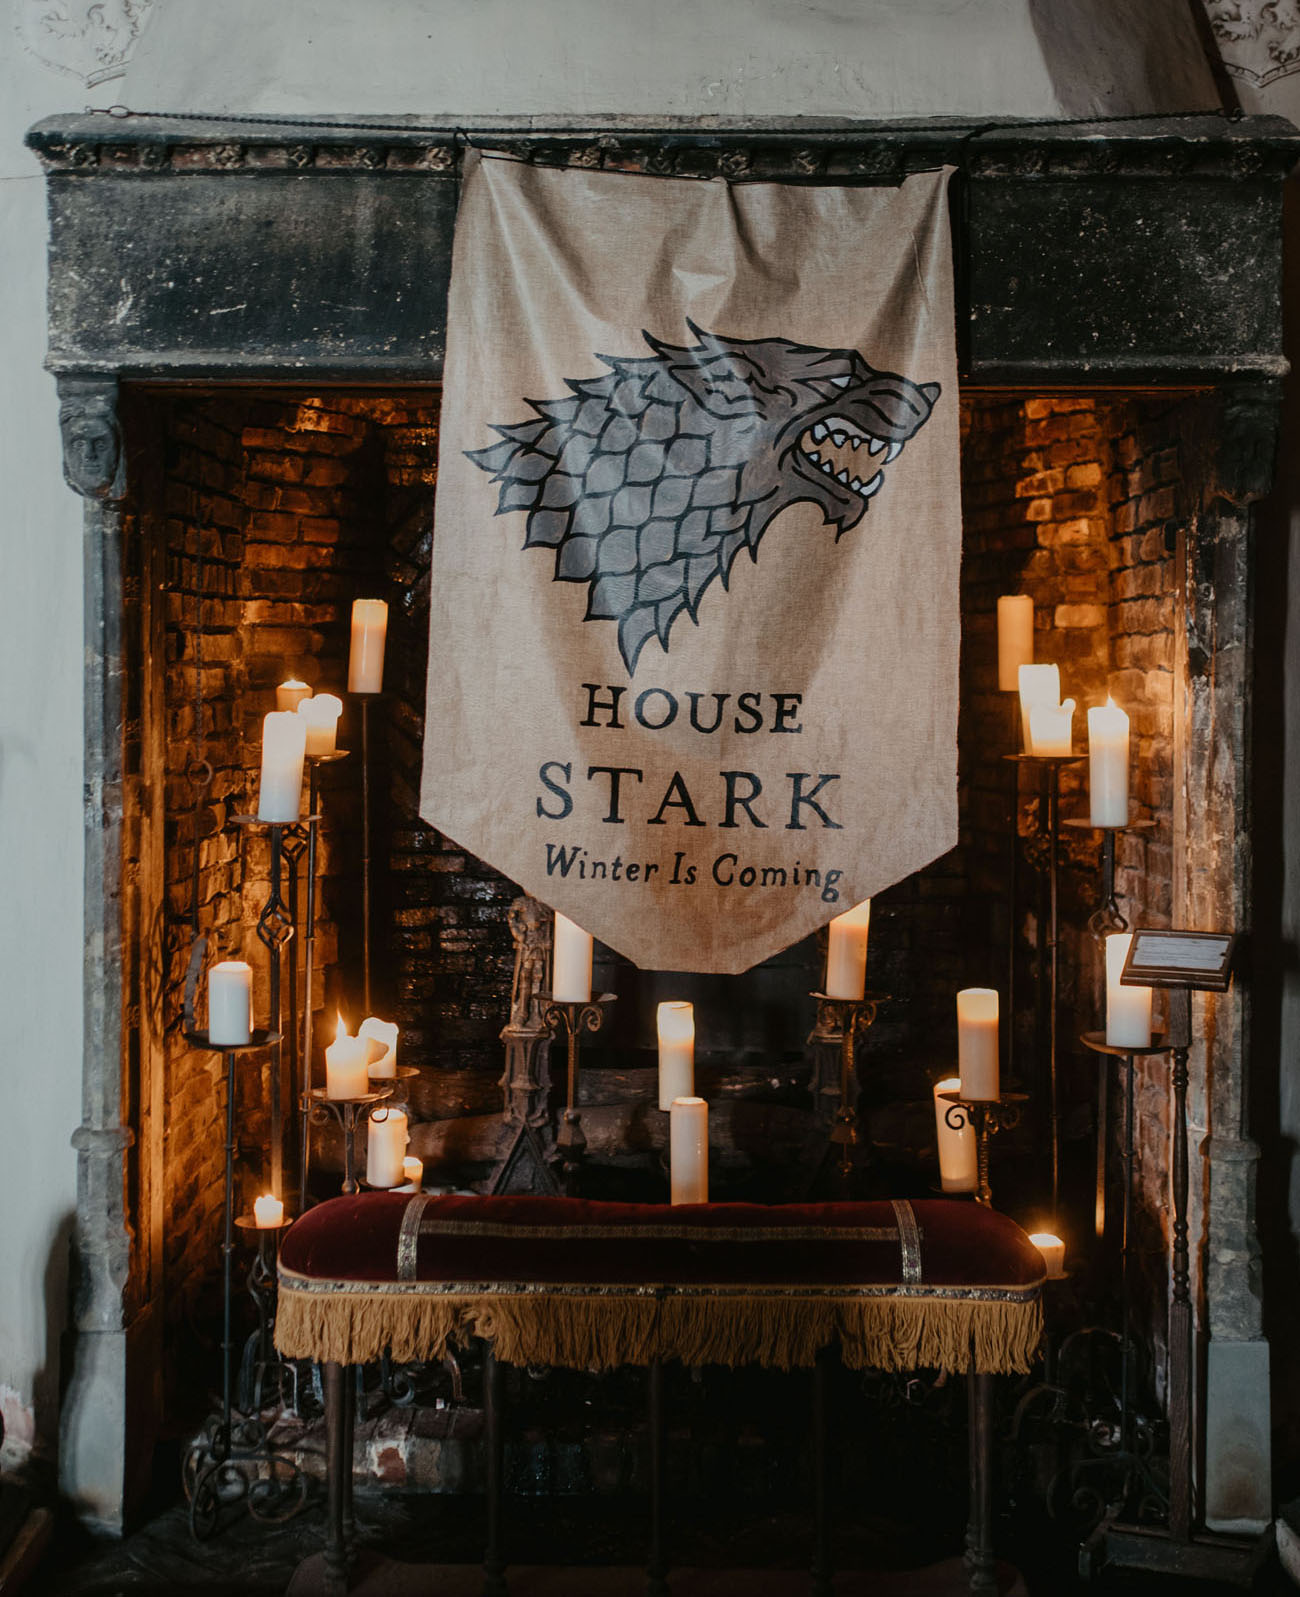 What a gorgeous ceremony space with an antique fireplace with candles and a Stark flag